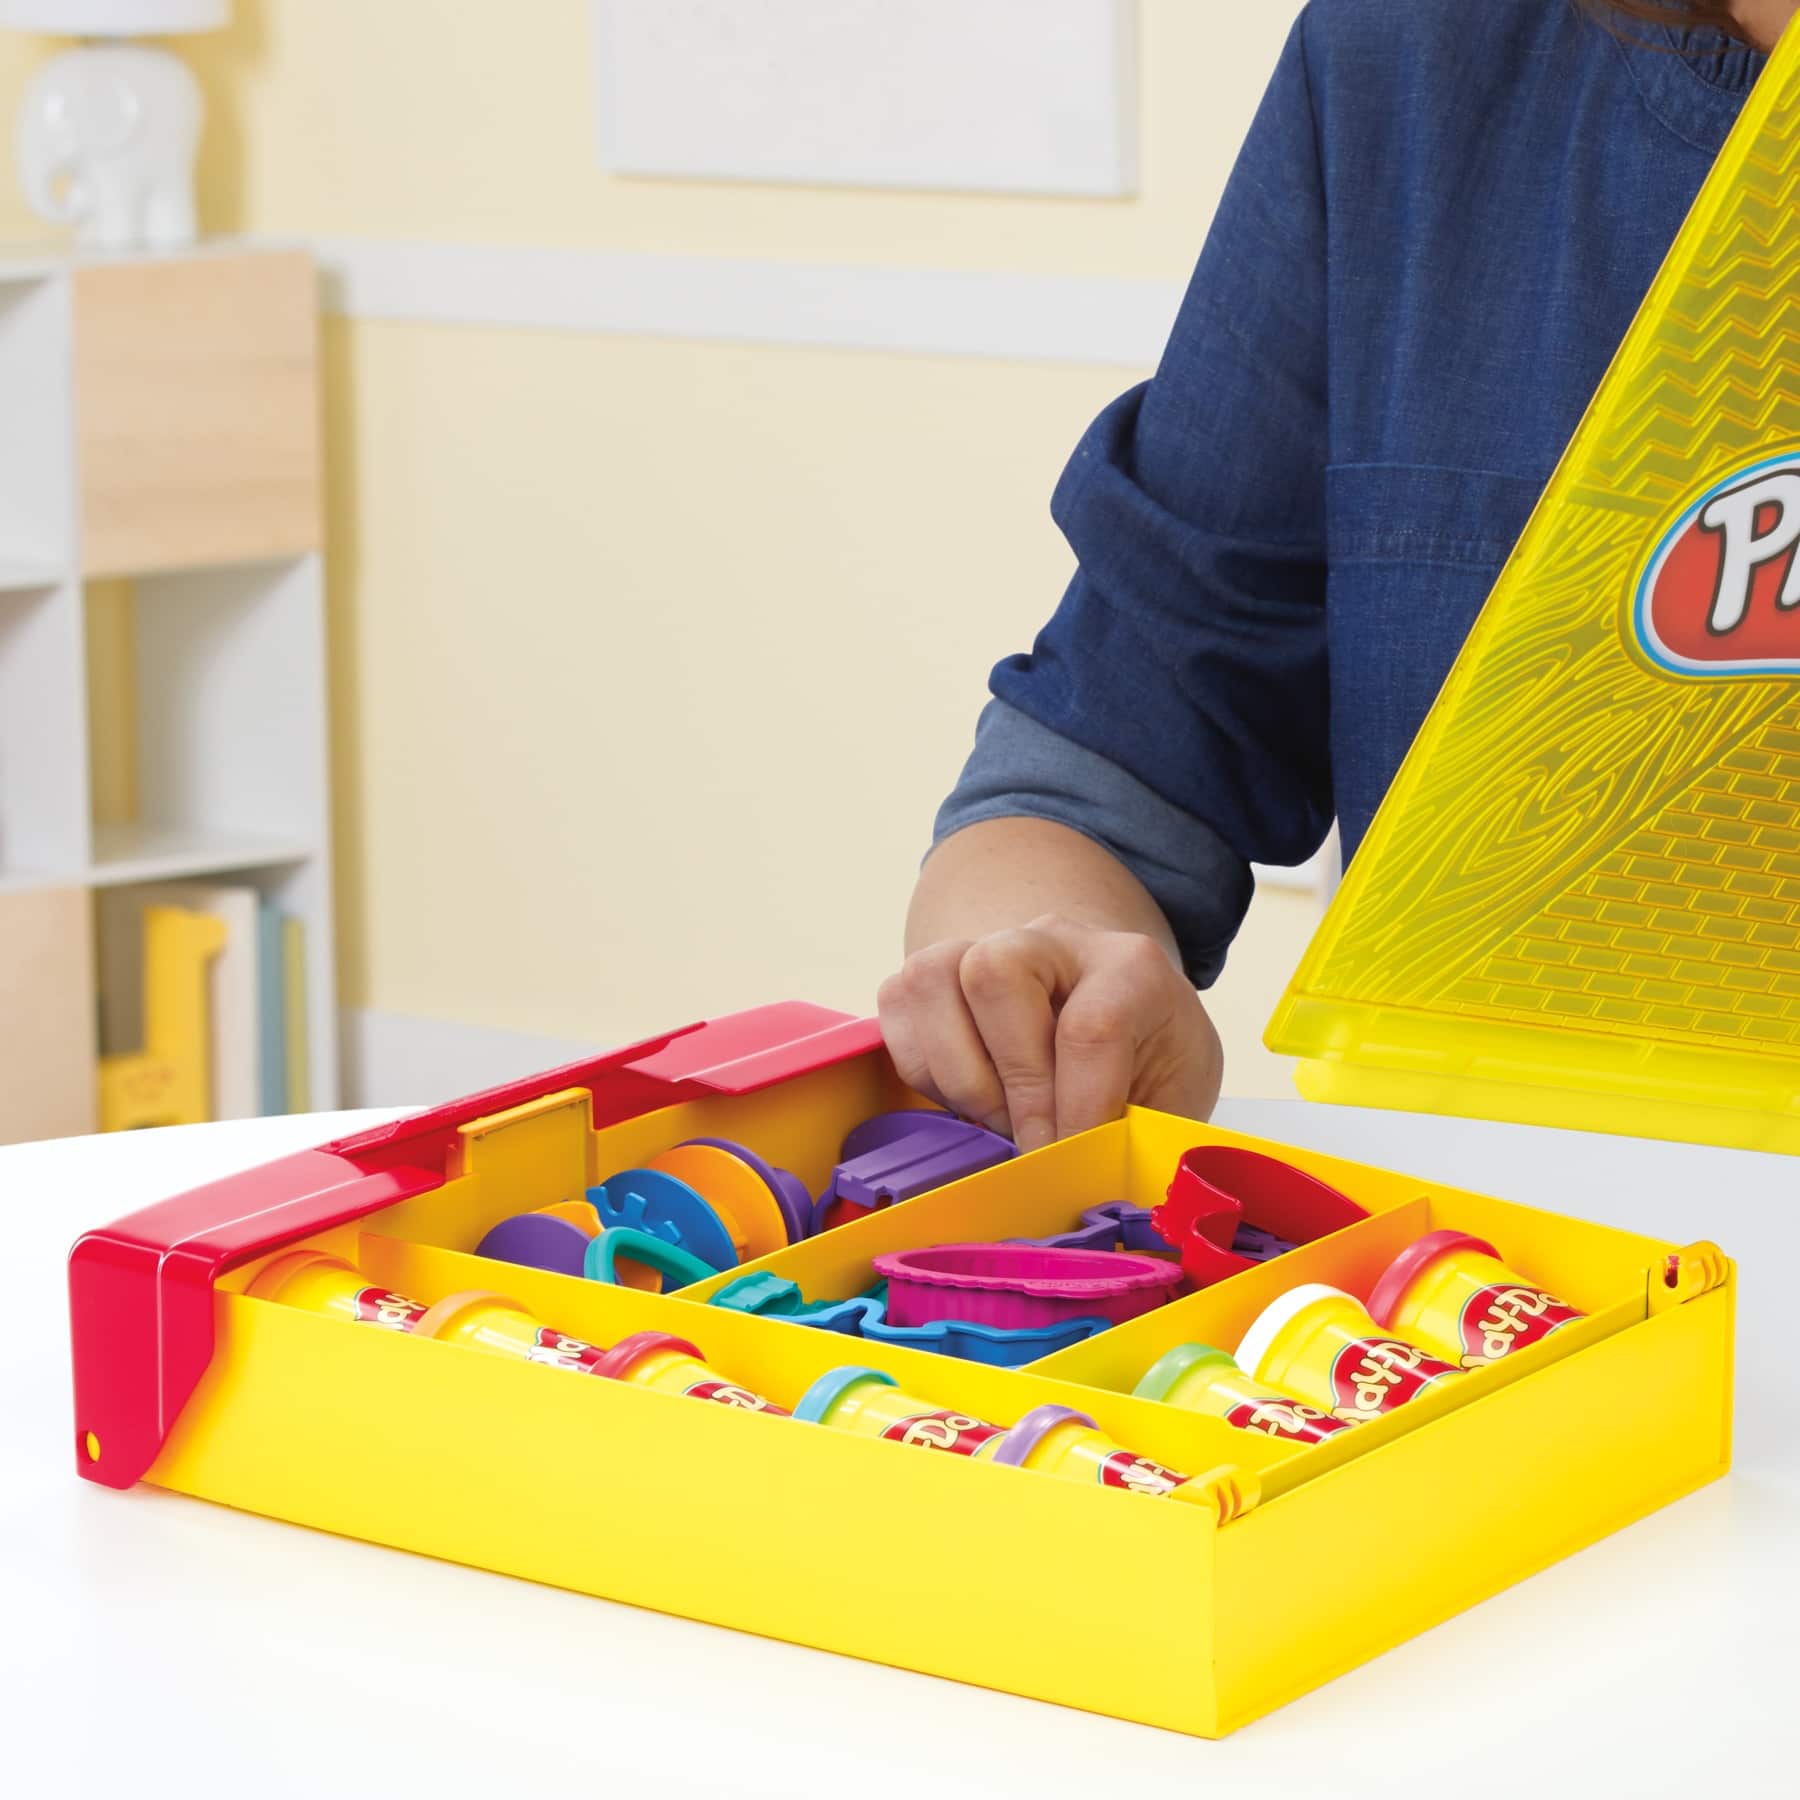 Buy Play-Doh Large Tools and Storage Set Online in Dubai & the UAE